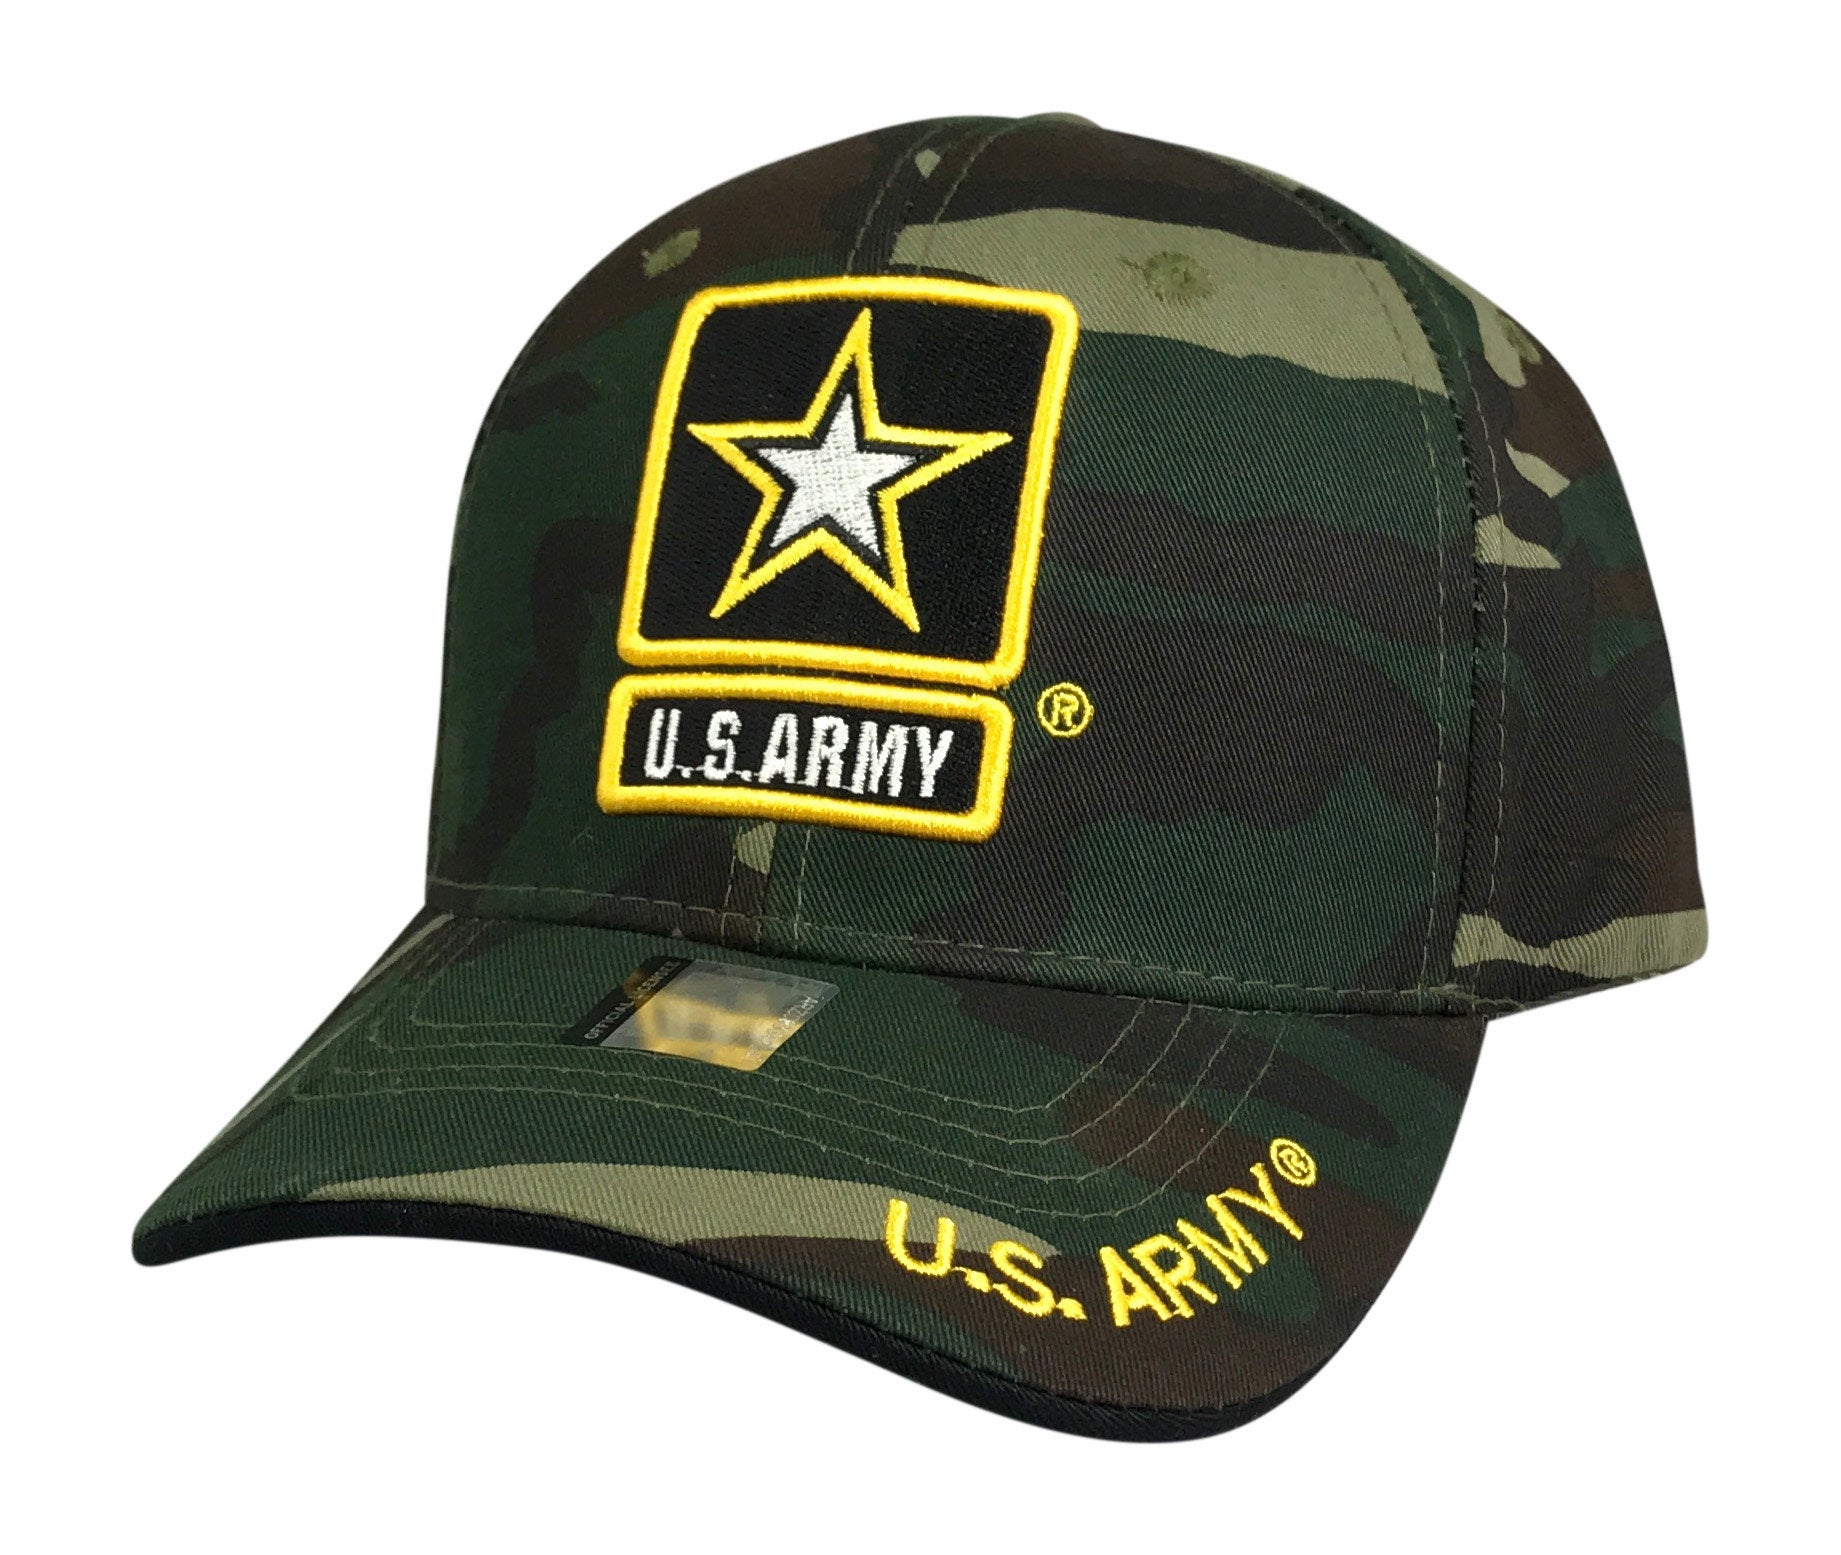 United States Army HAT With Star Logo - Camouflage A03ARM01 CAM/BK